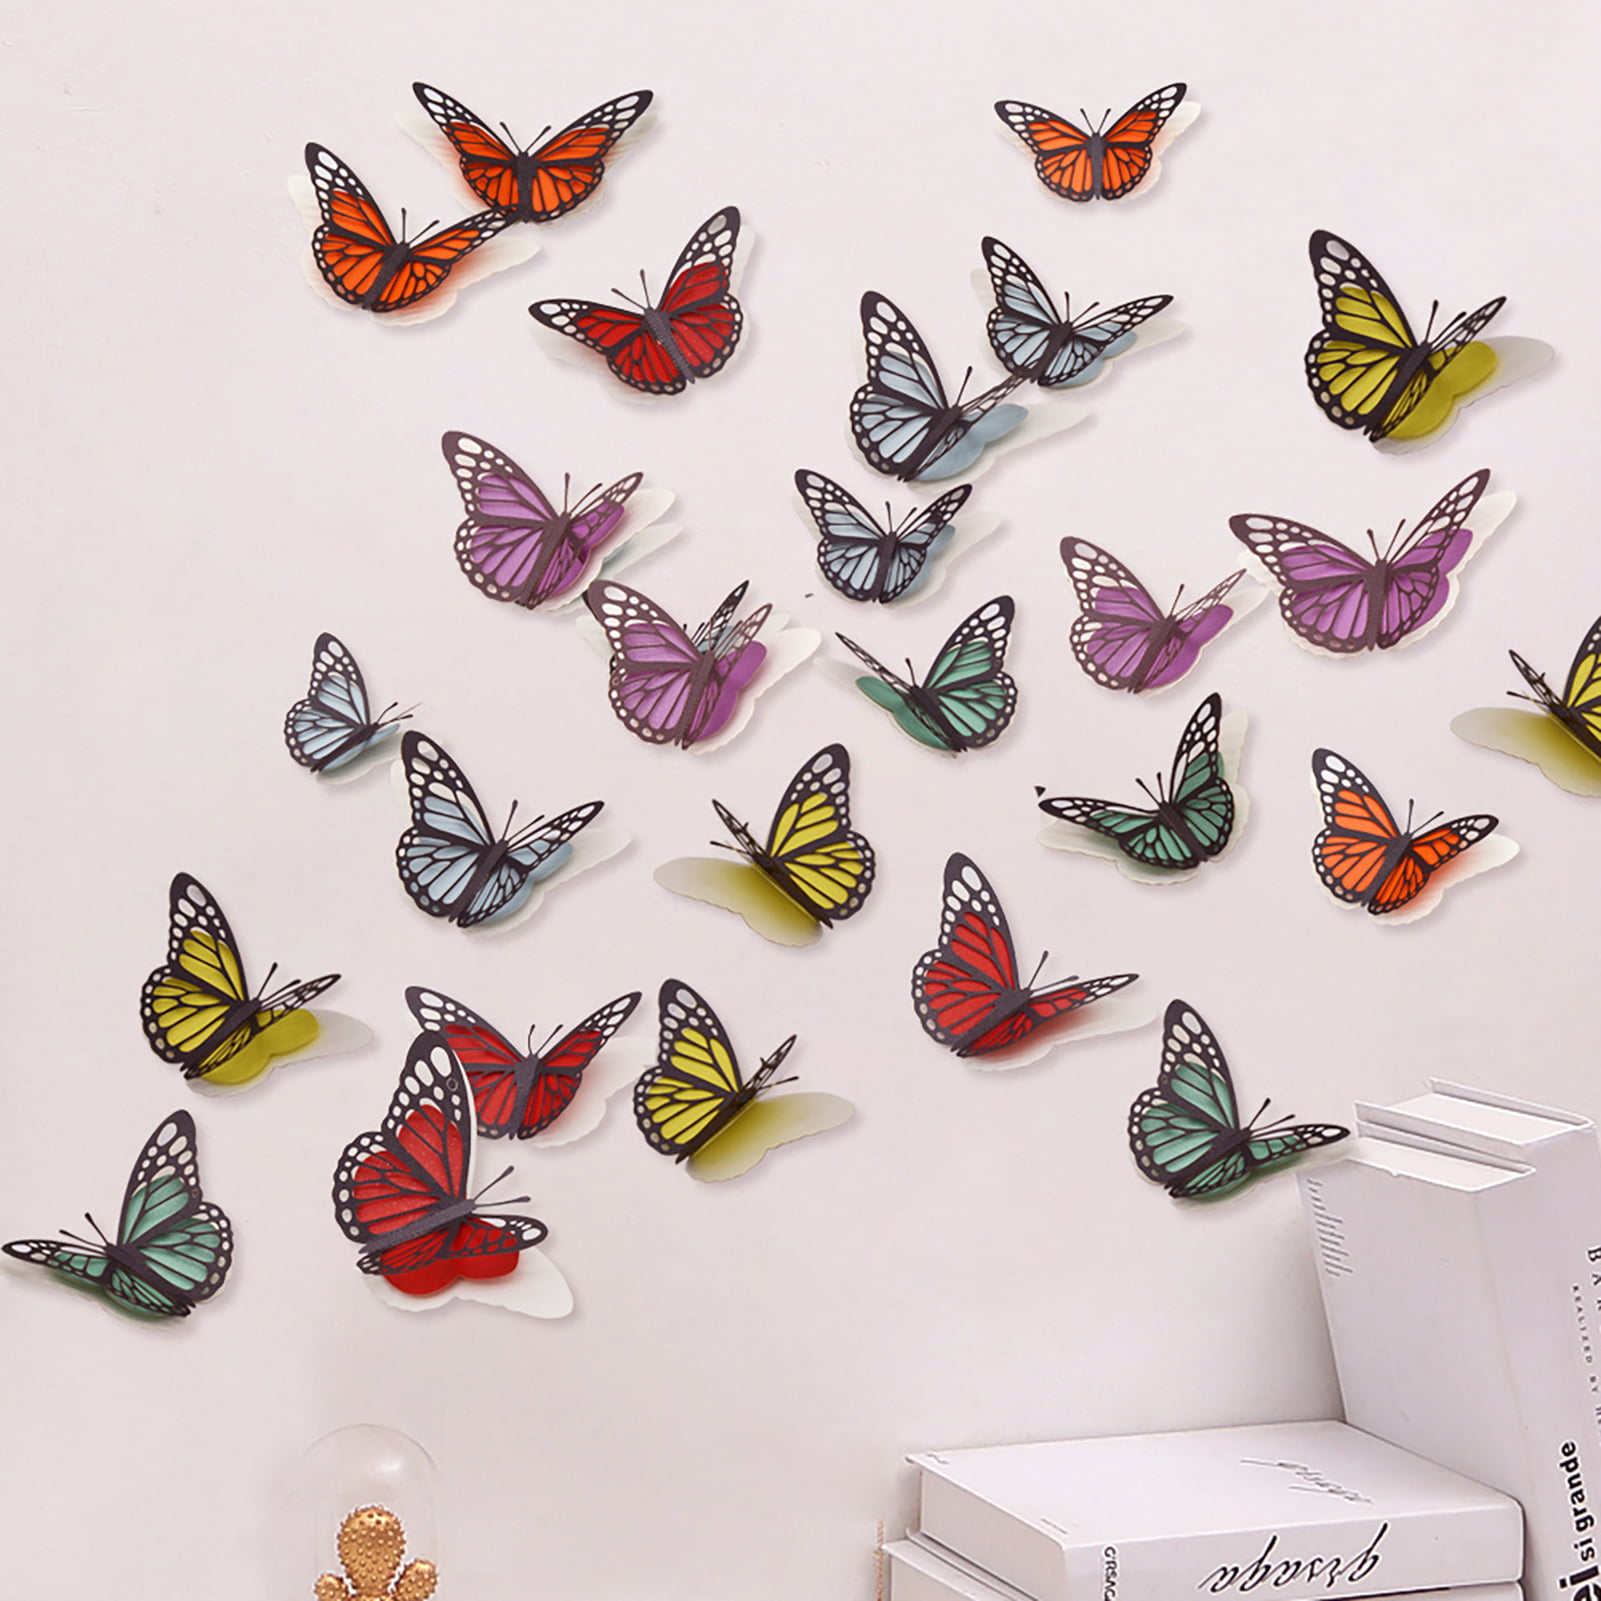 Travelwant Giant Butterfly Wall Stickers Decor,3D Large Butterflies Wall  Magnetism Decals Removable DIY Home Art Decorations 